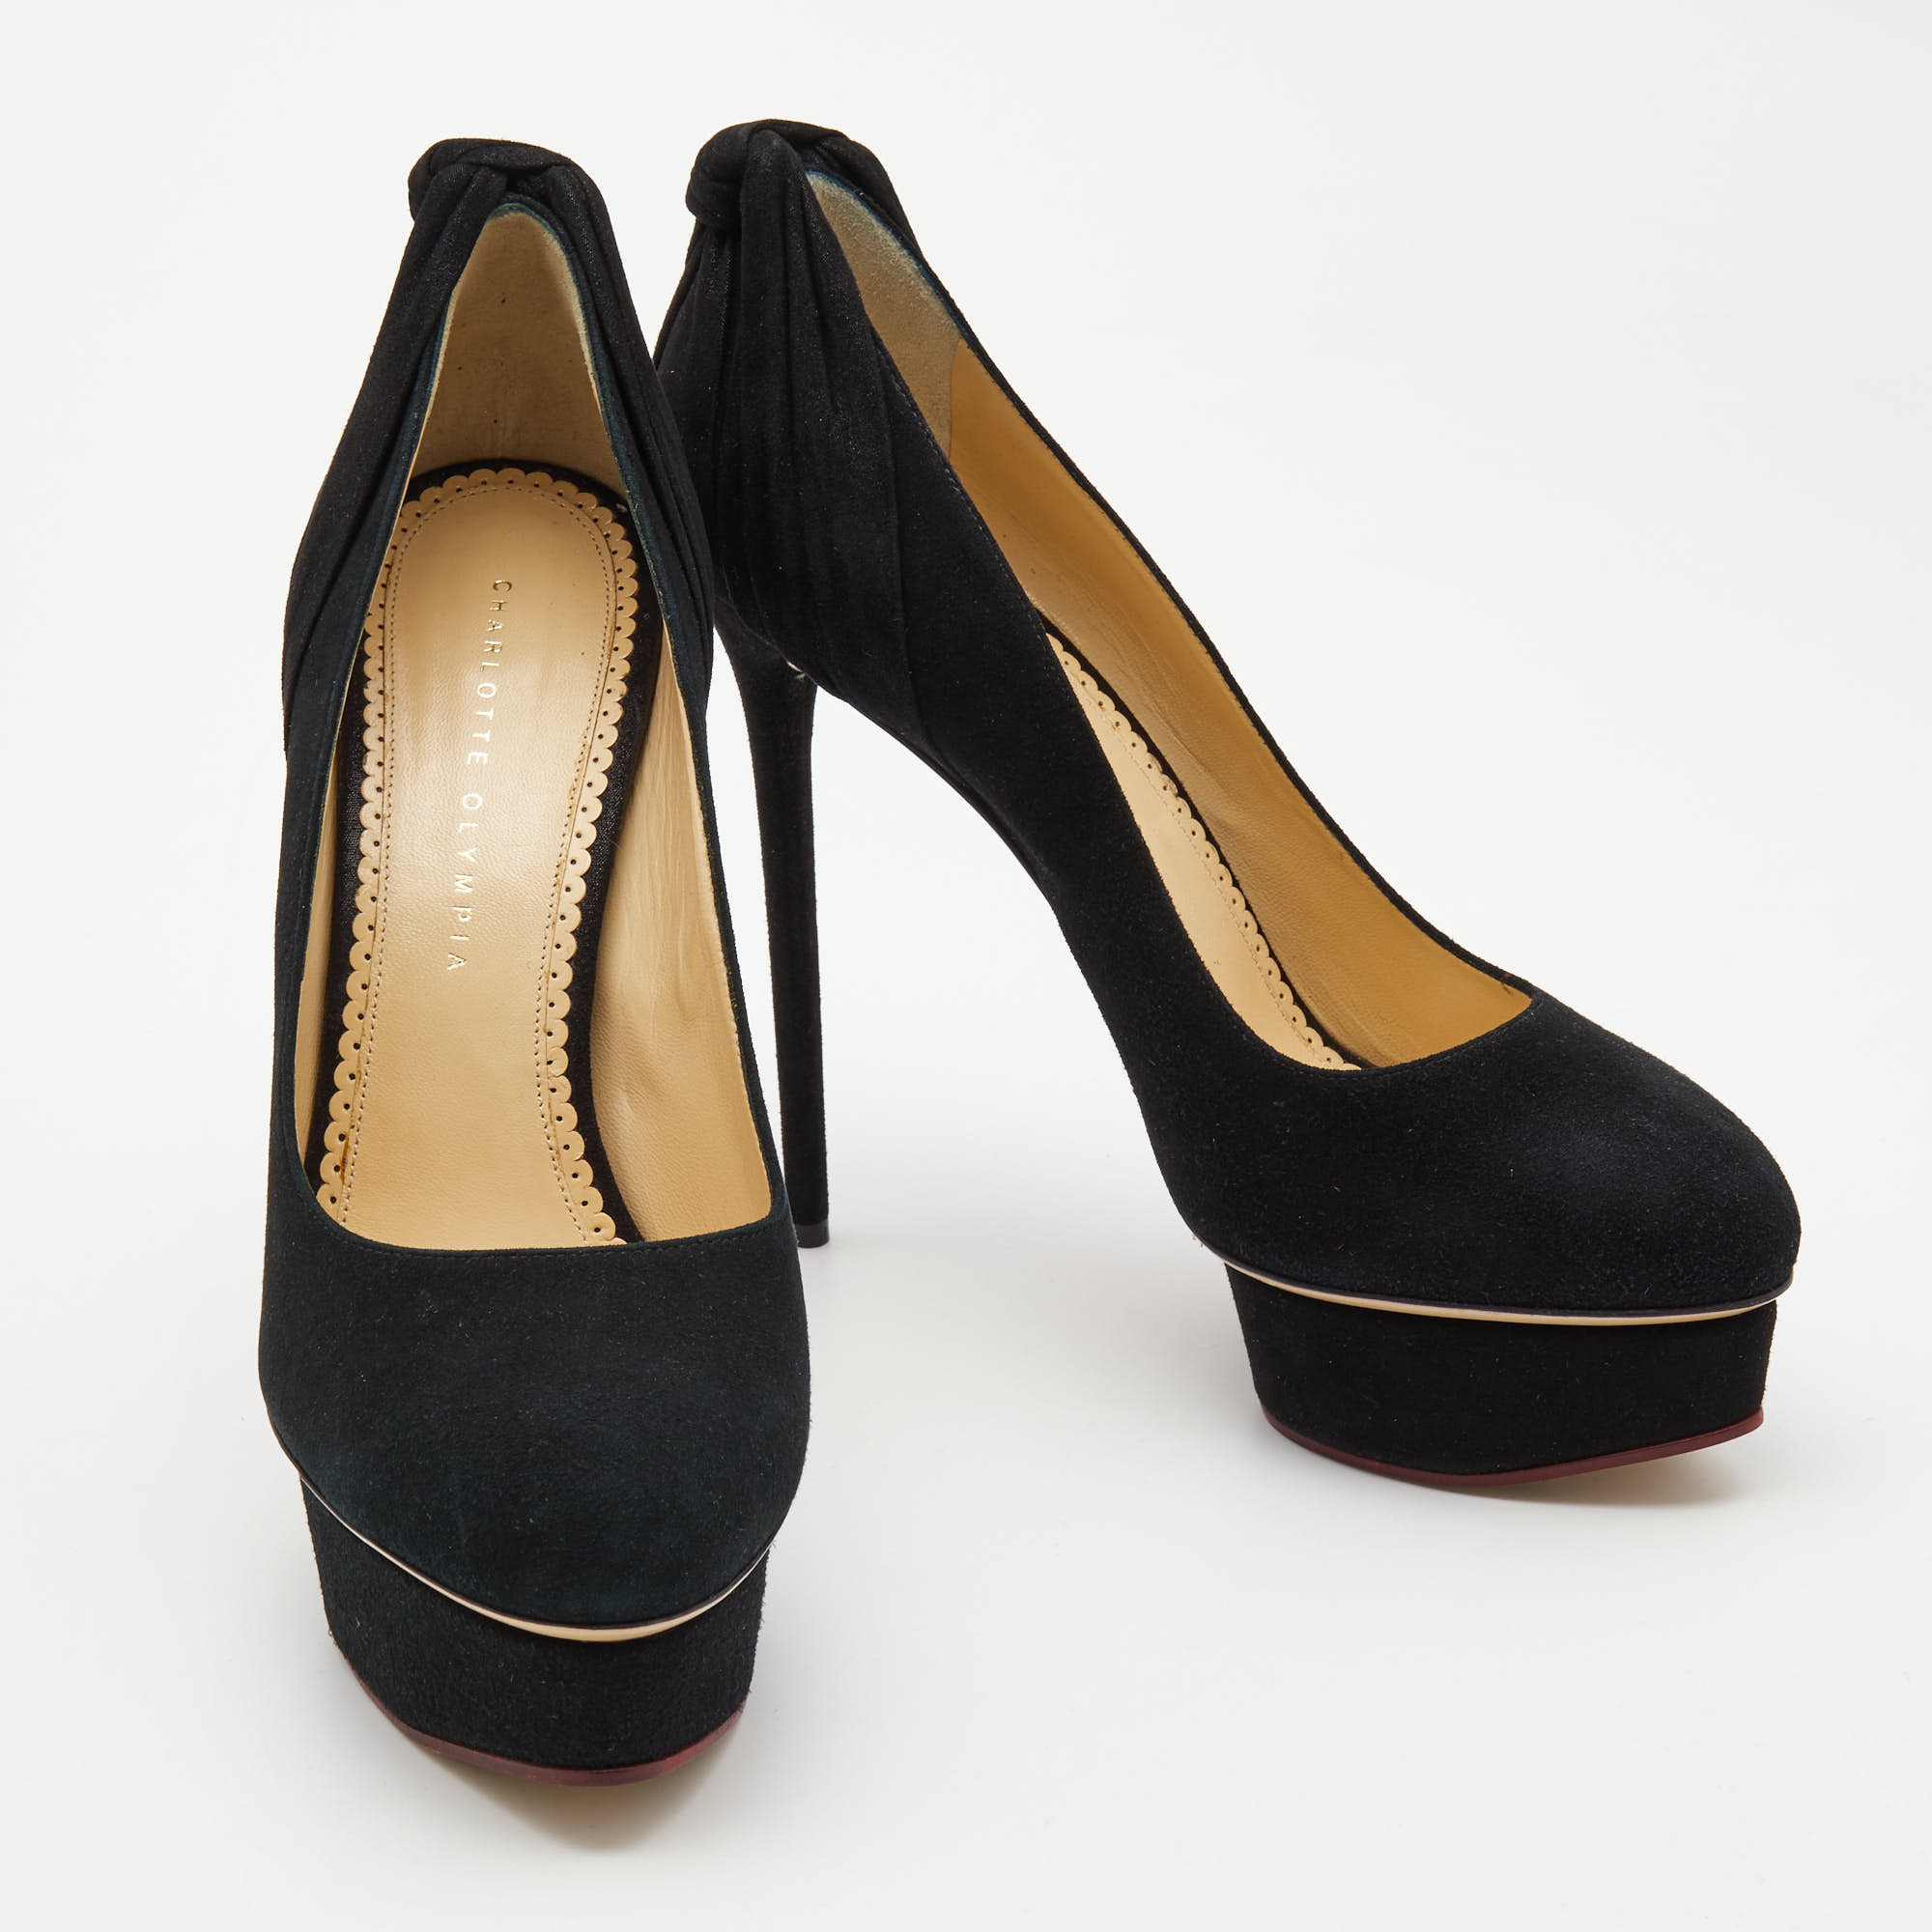 Charlotte Olympia Black Suede And Fabric Knot Detail Josephine Platform Pumps Size 41